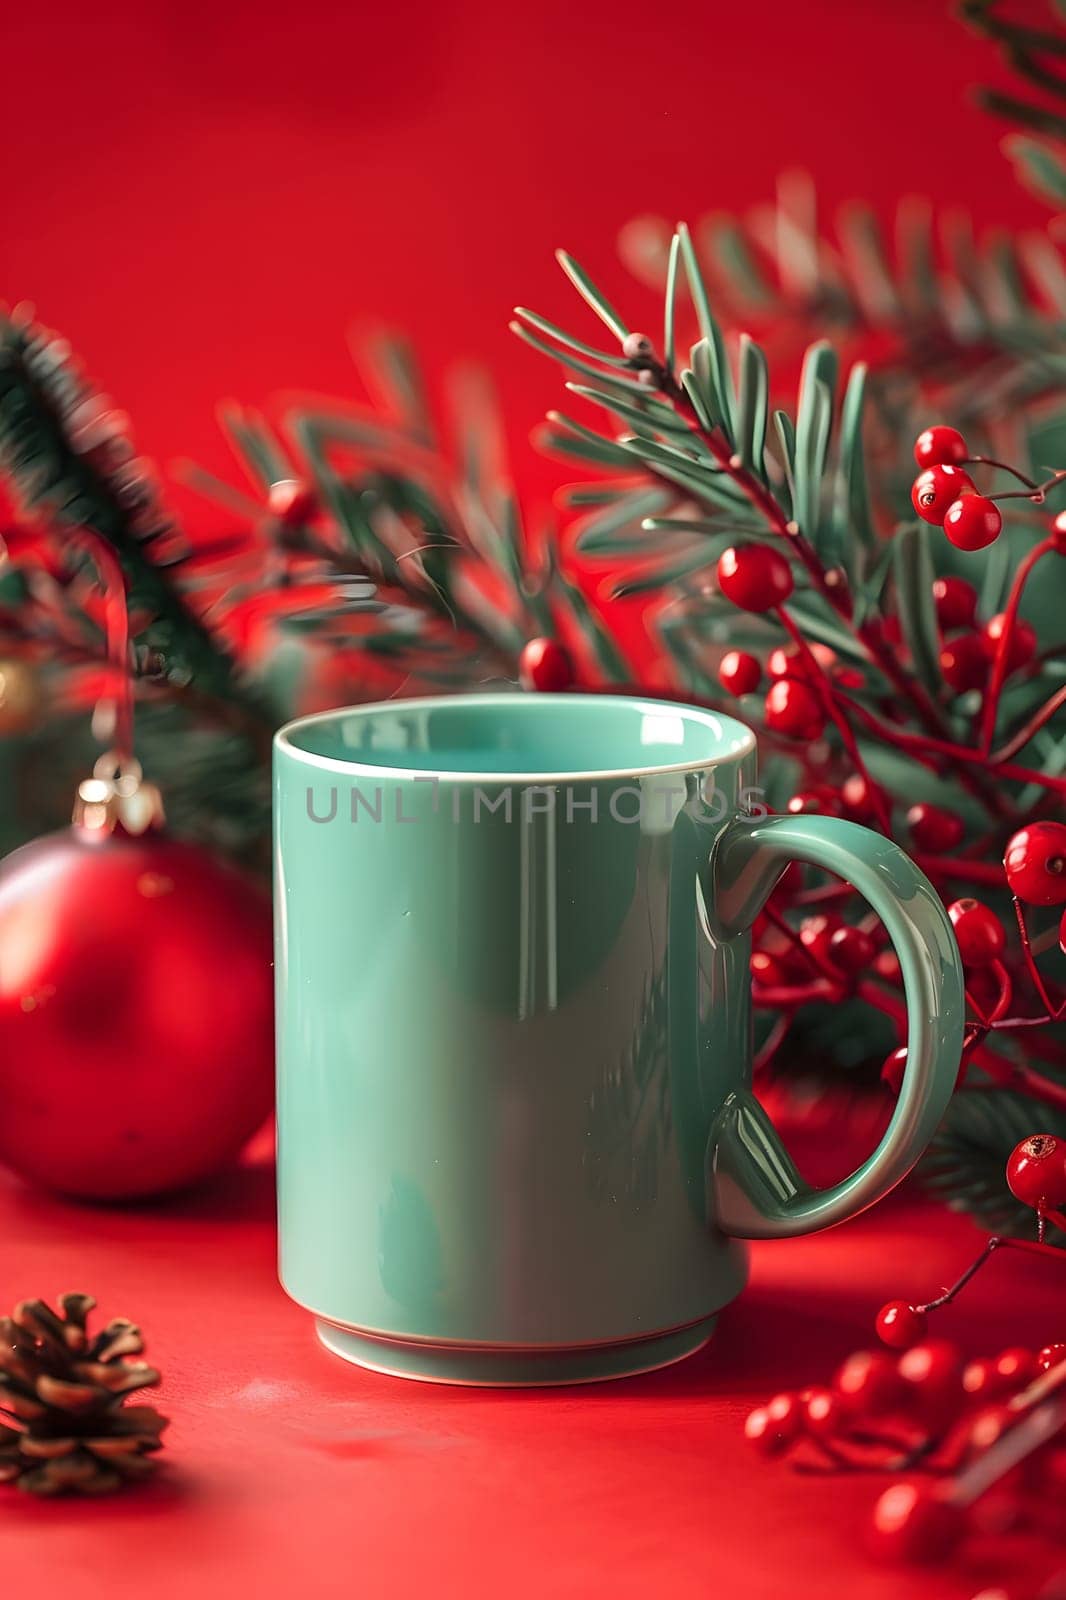 A cup on a red table with Christmas ornaments nearby by Nadtochiy